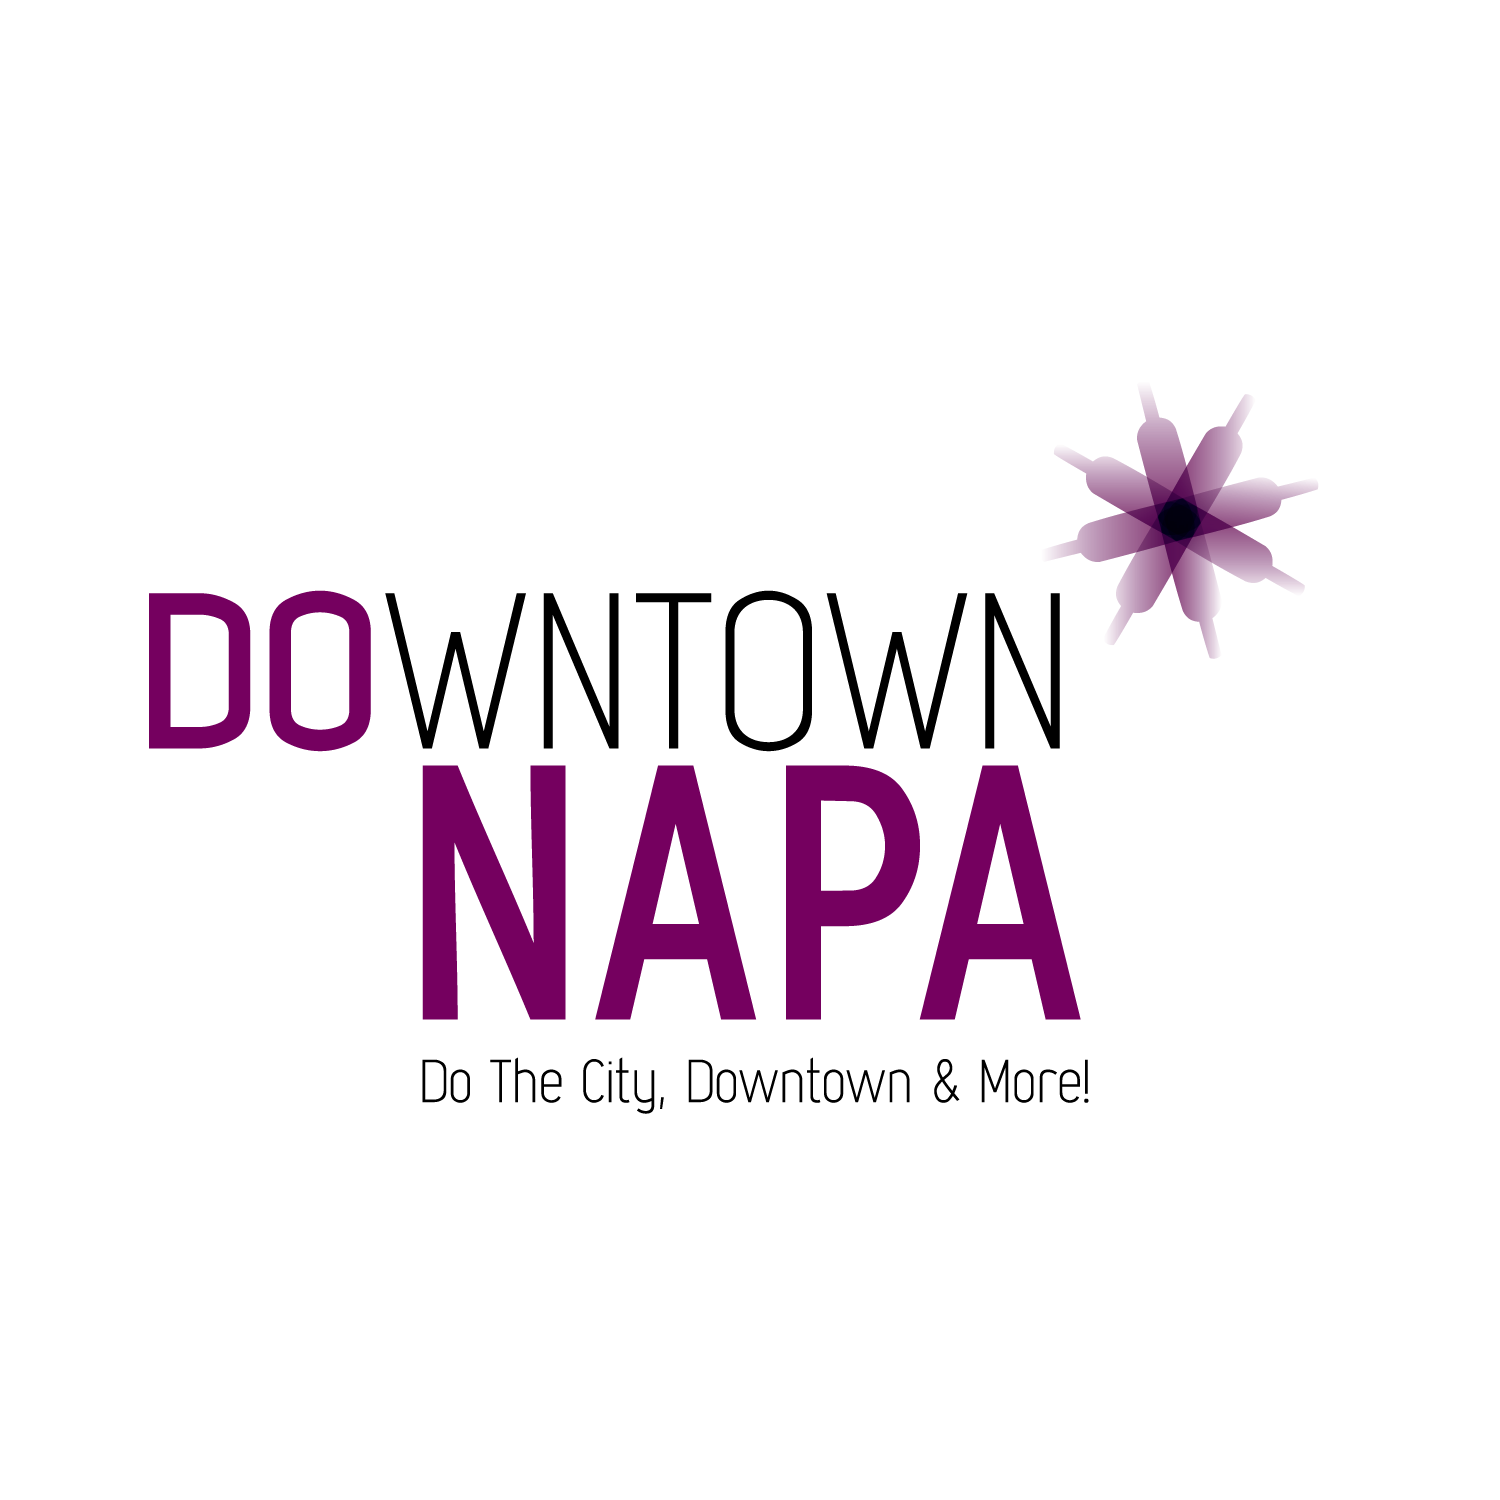 Located just a short drive from three international airports, Downtown Napa is the premier Napa Valley destination.